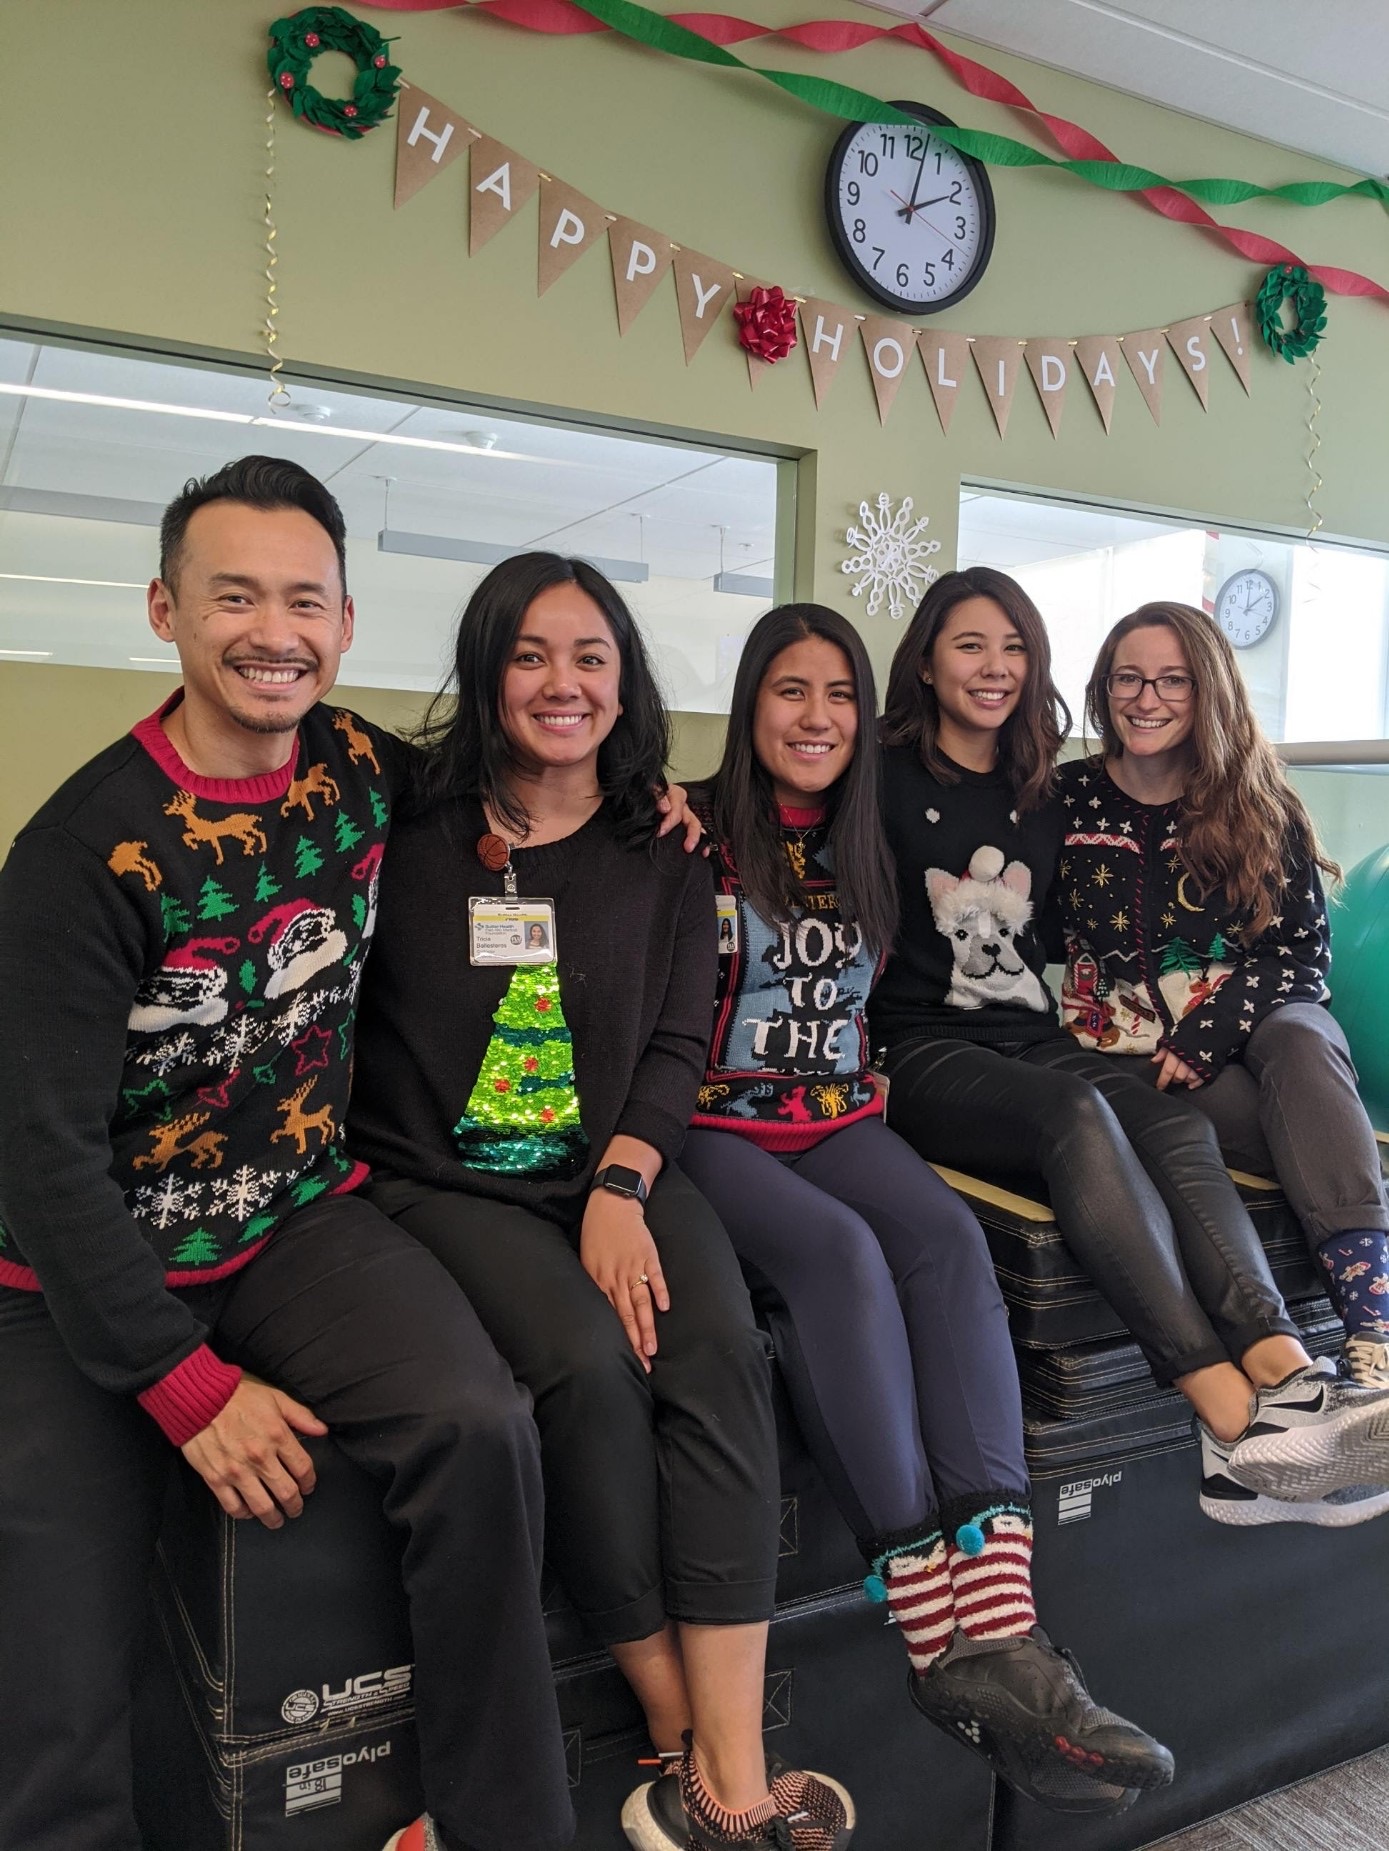 Ugly sweater day at Agile!